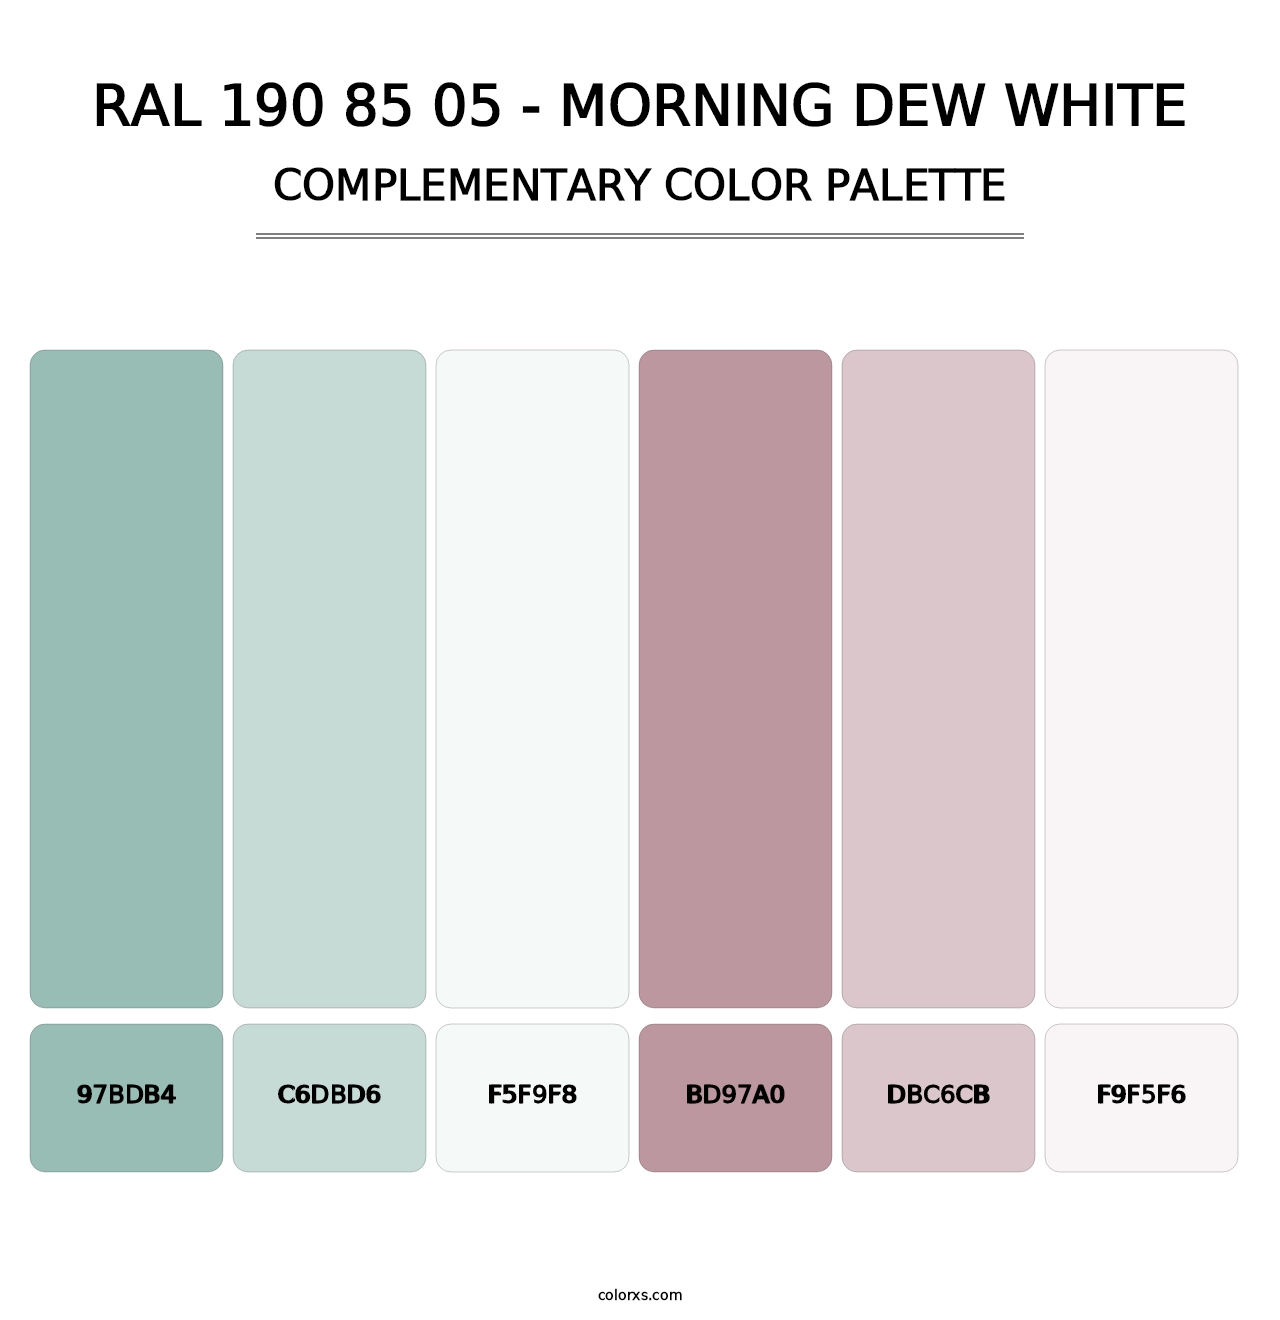 RAL 190 85 05 - Morning Dew White - Complementary Color Palette